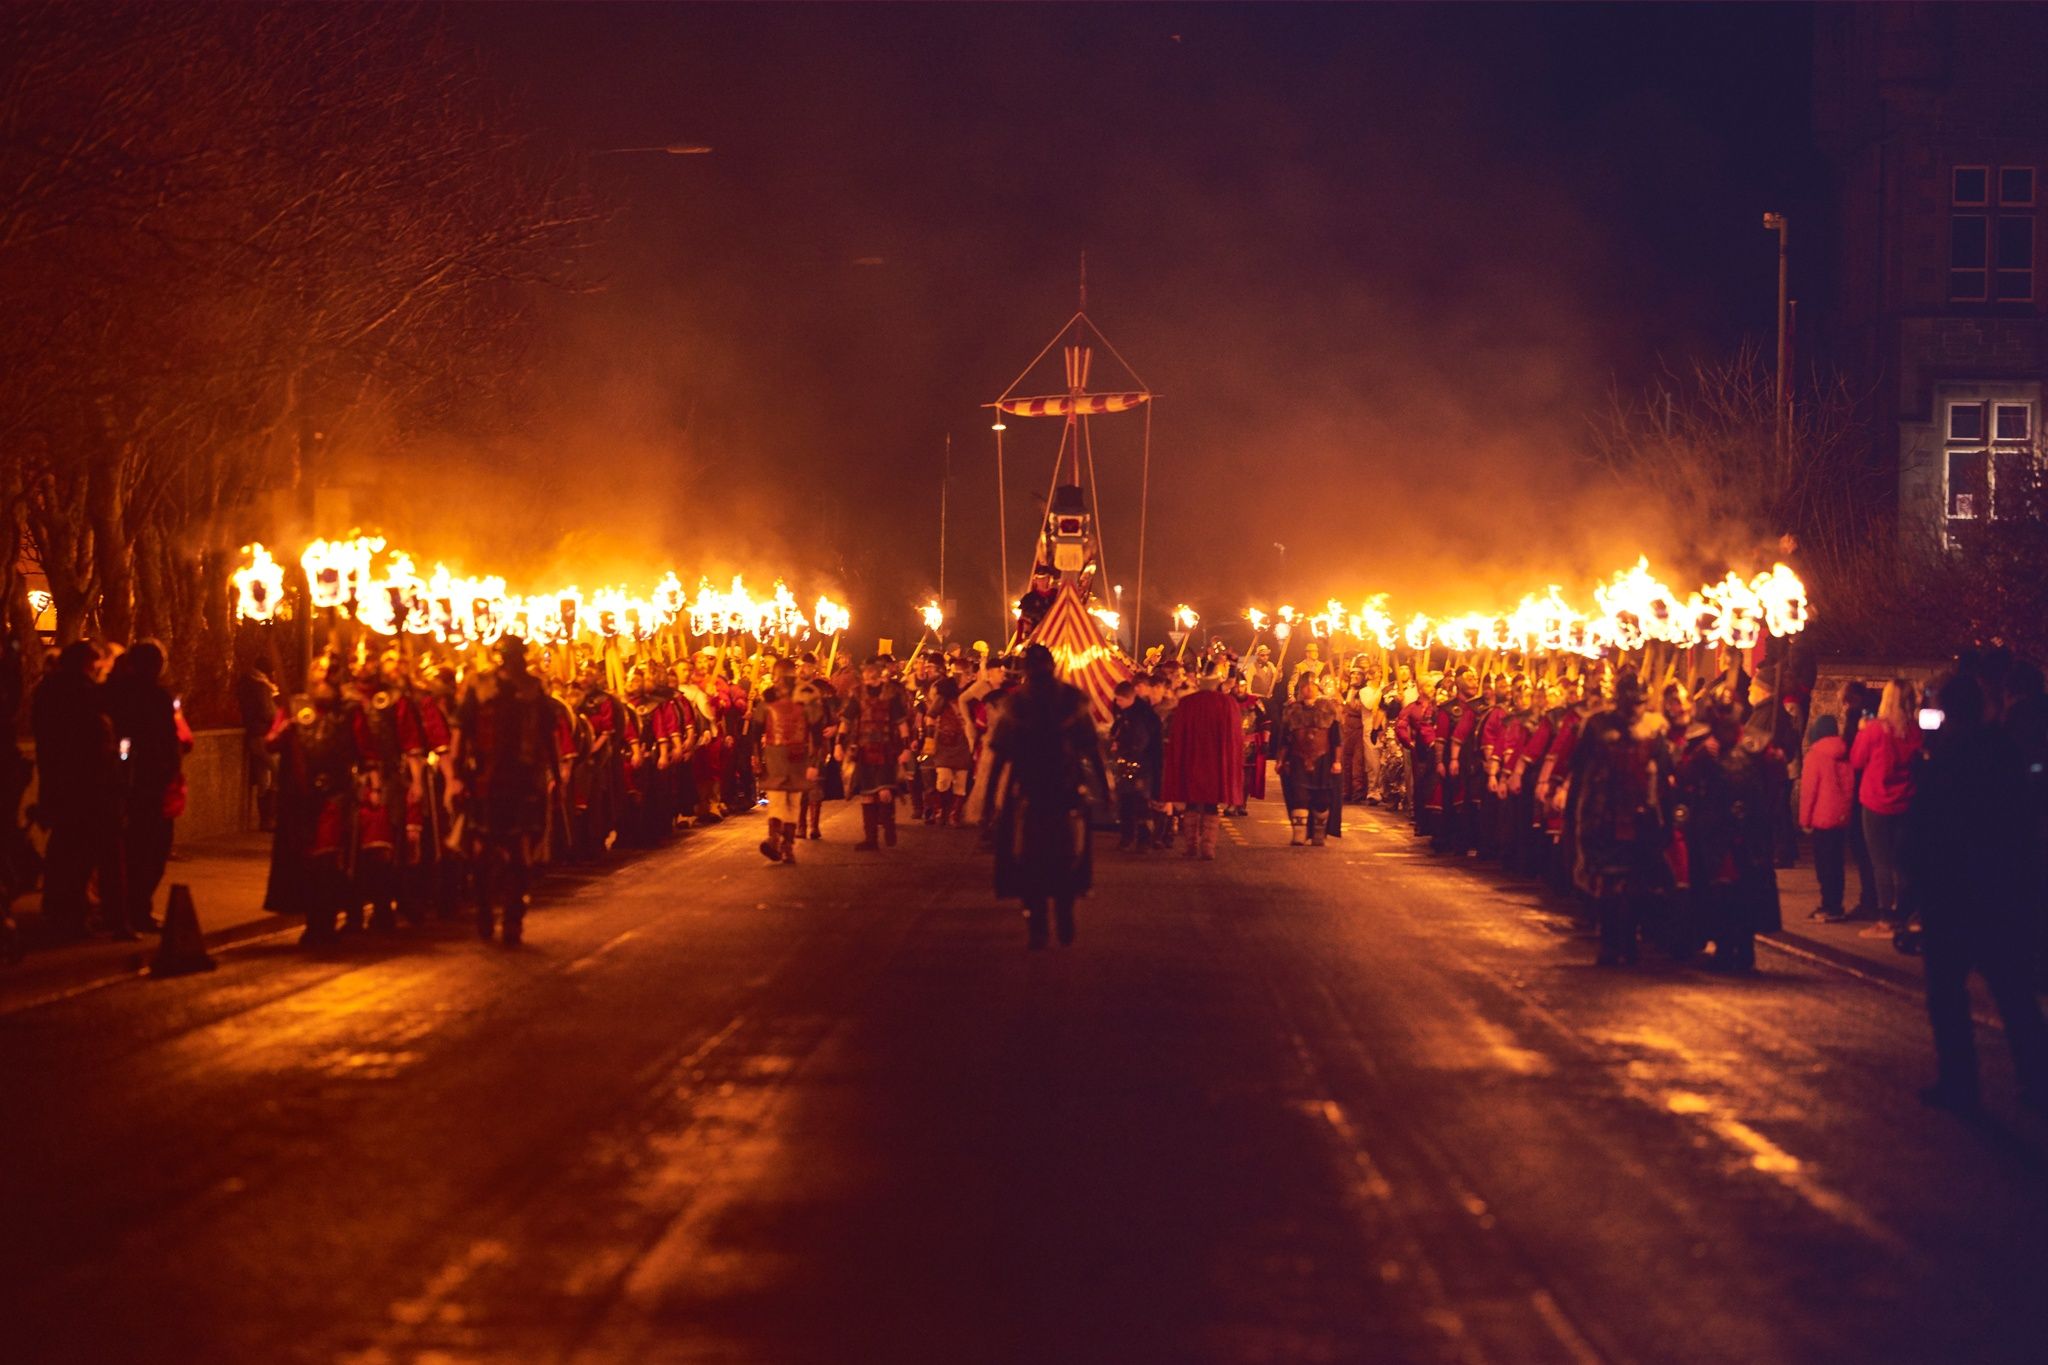 Up Helly Aa, the largest Viking fire festival in Europe